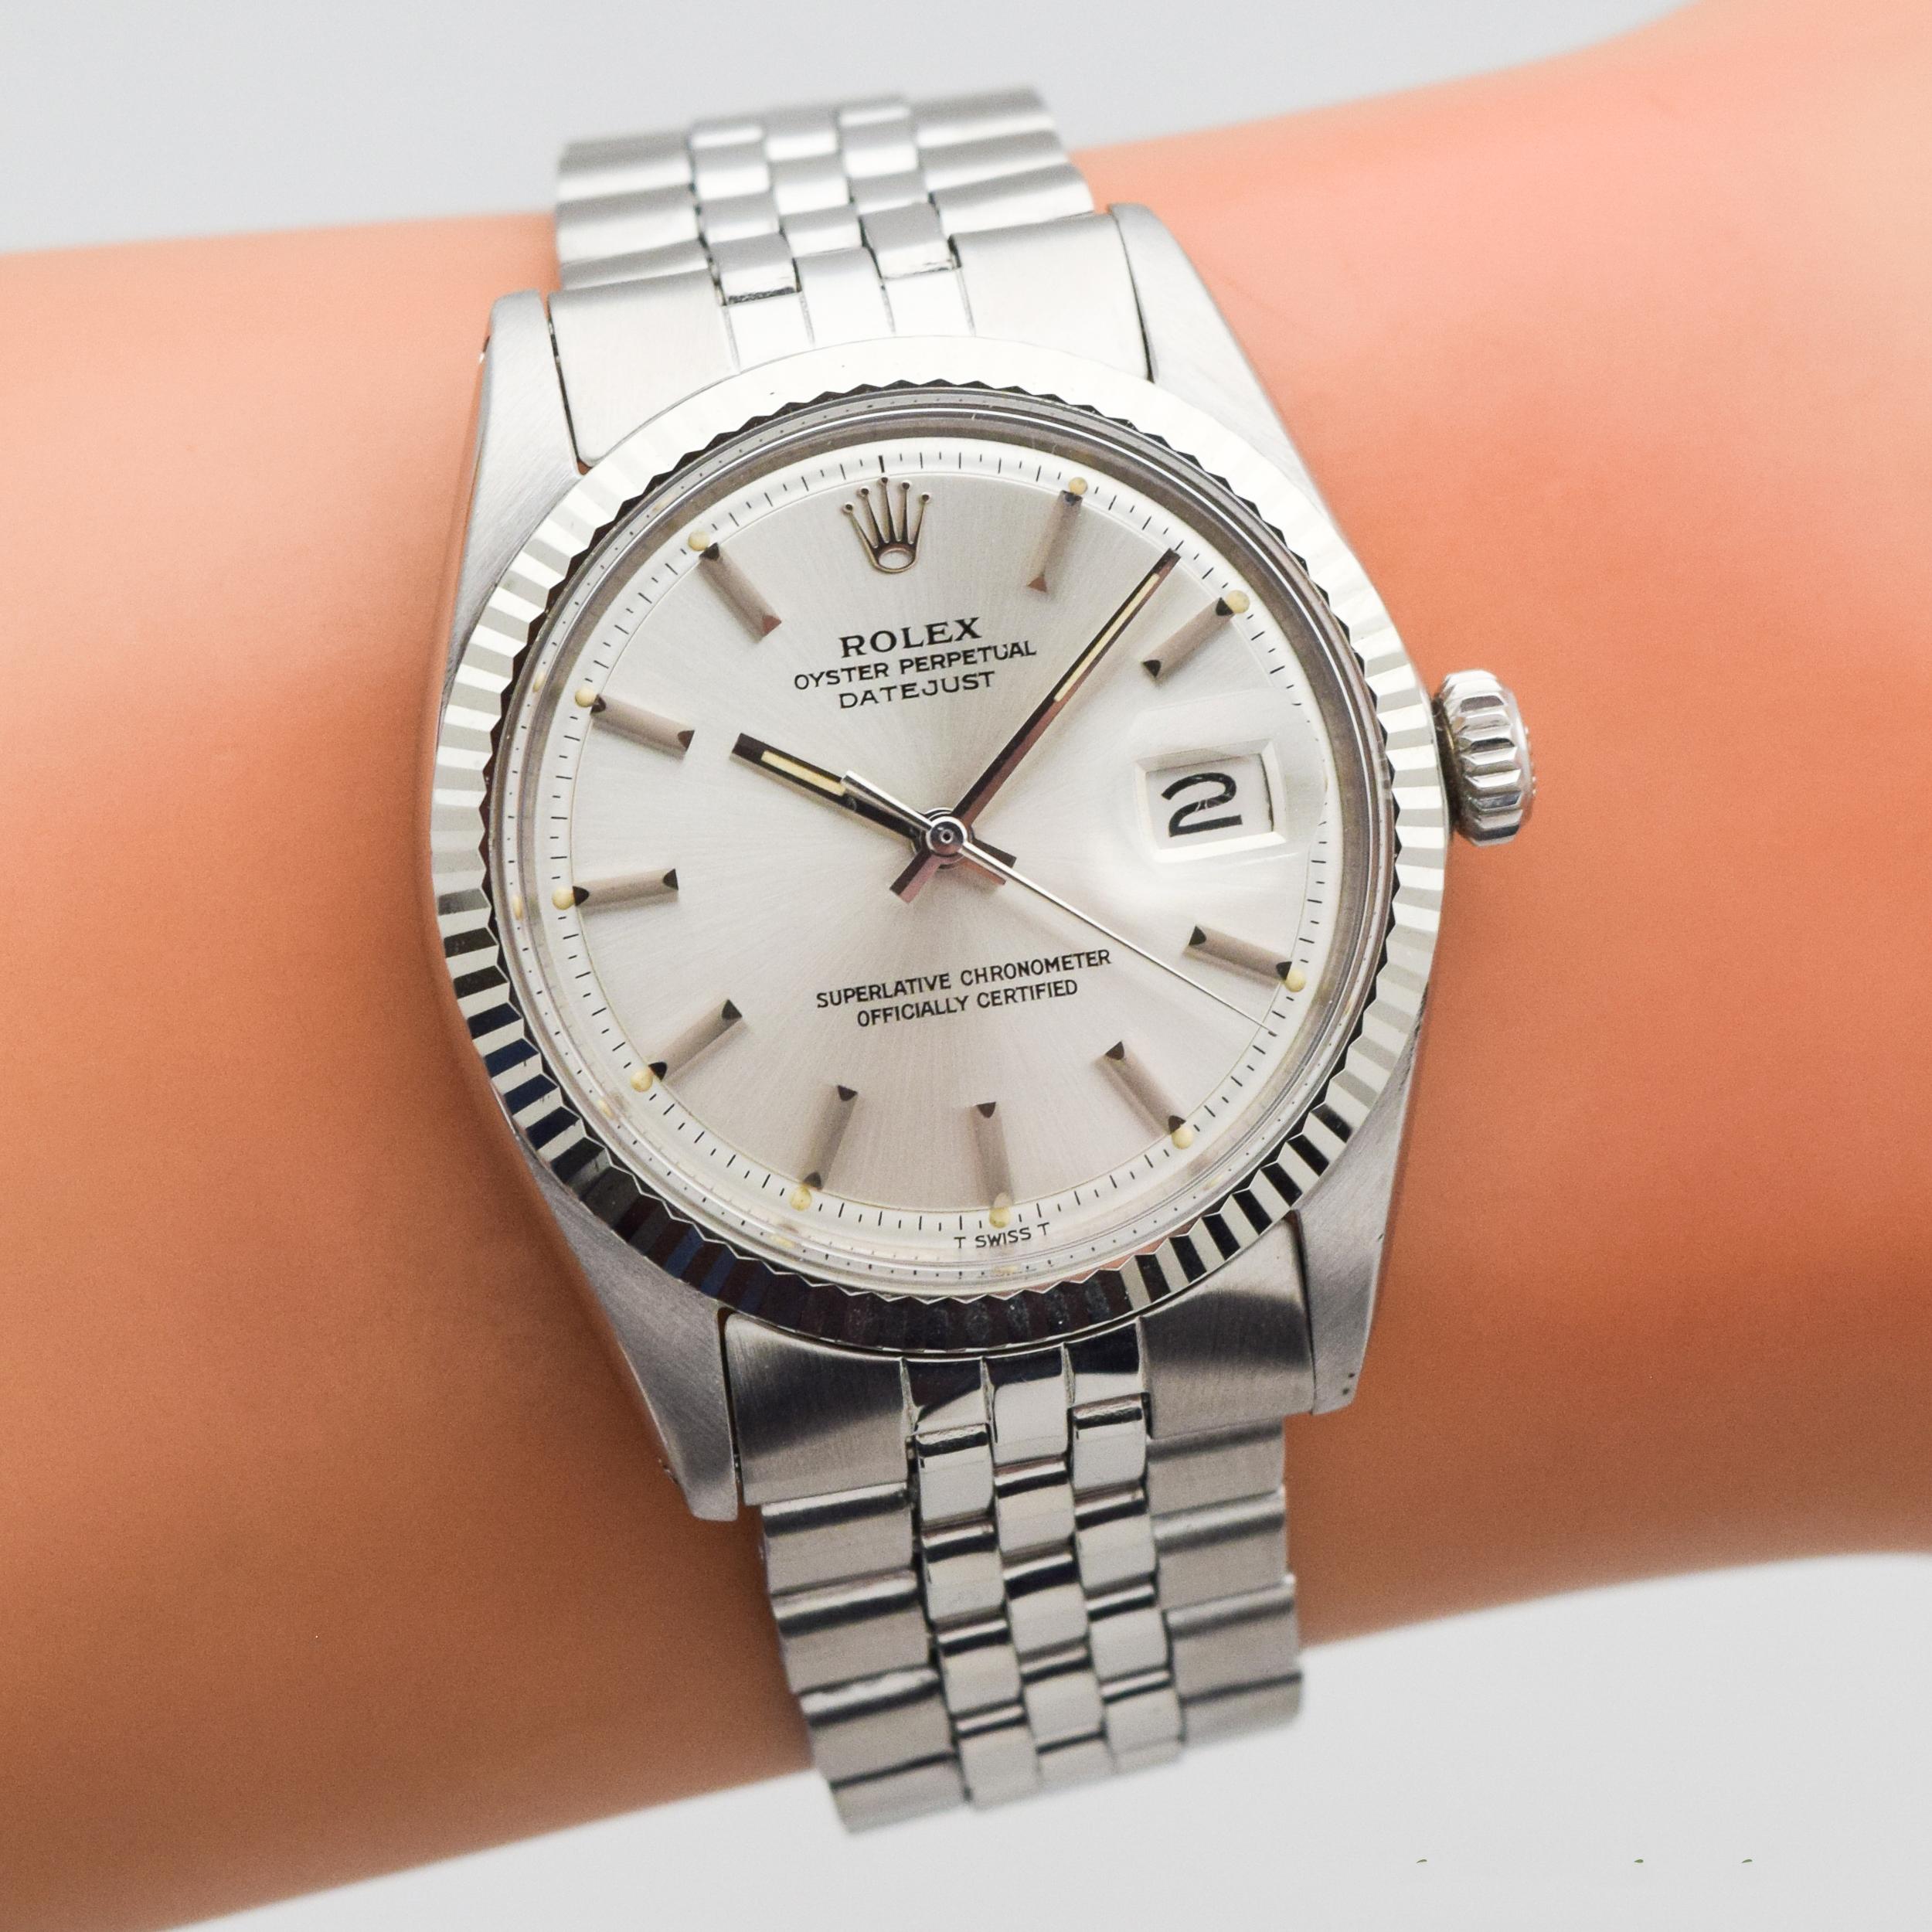 Vintage Rolex Datejust Reference 1601 Watch, 1970 For Sale 4